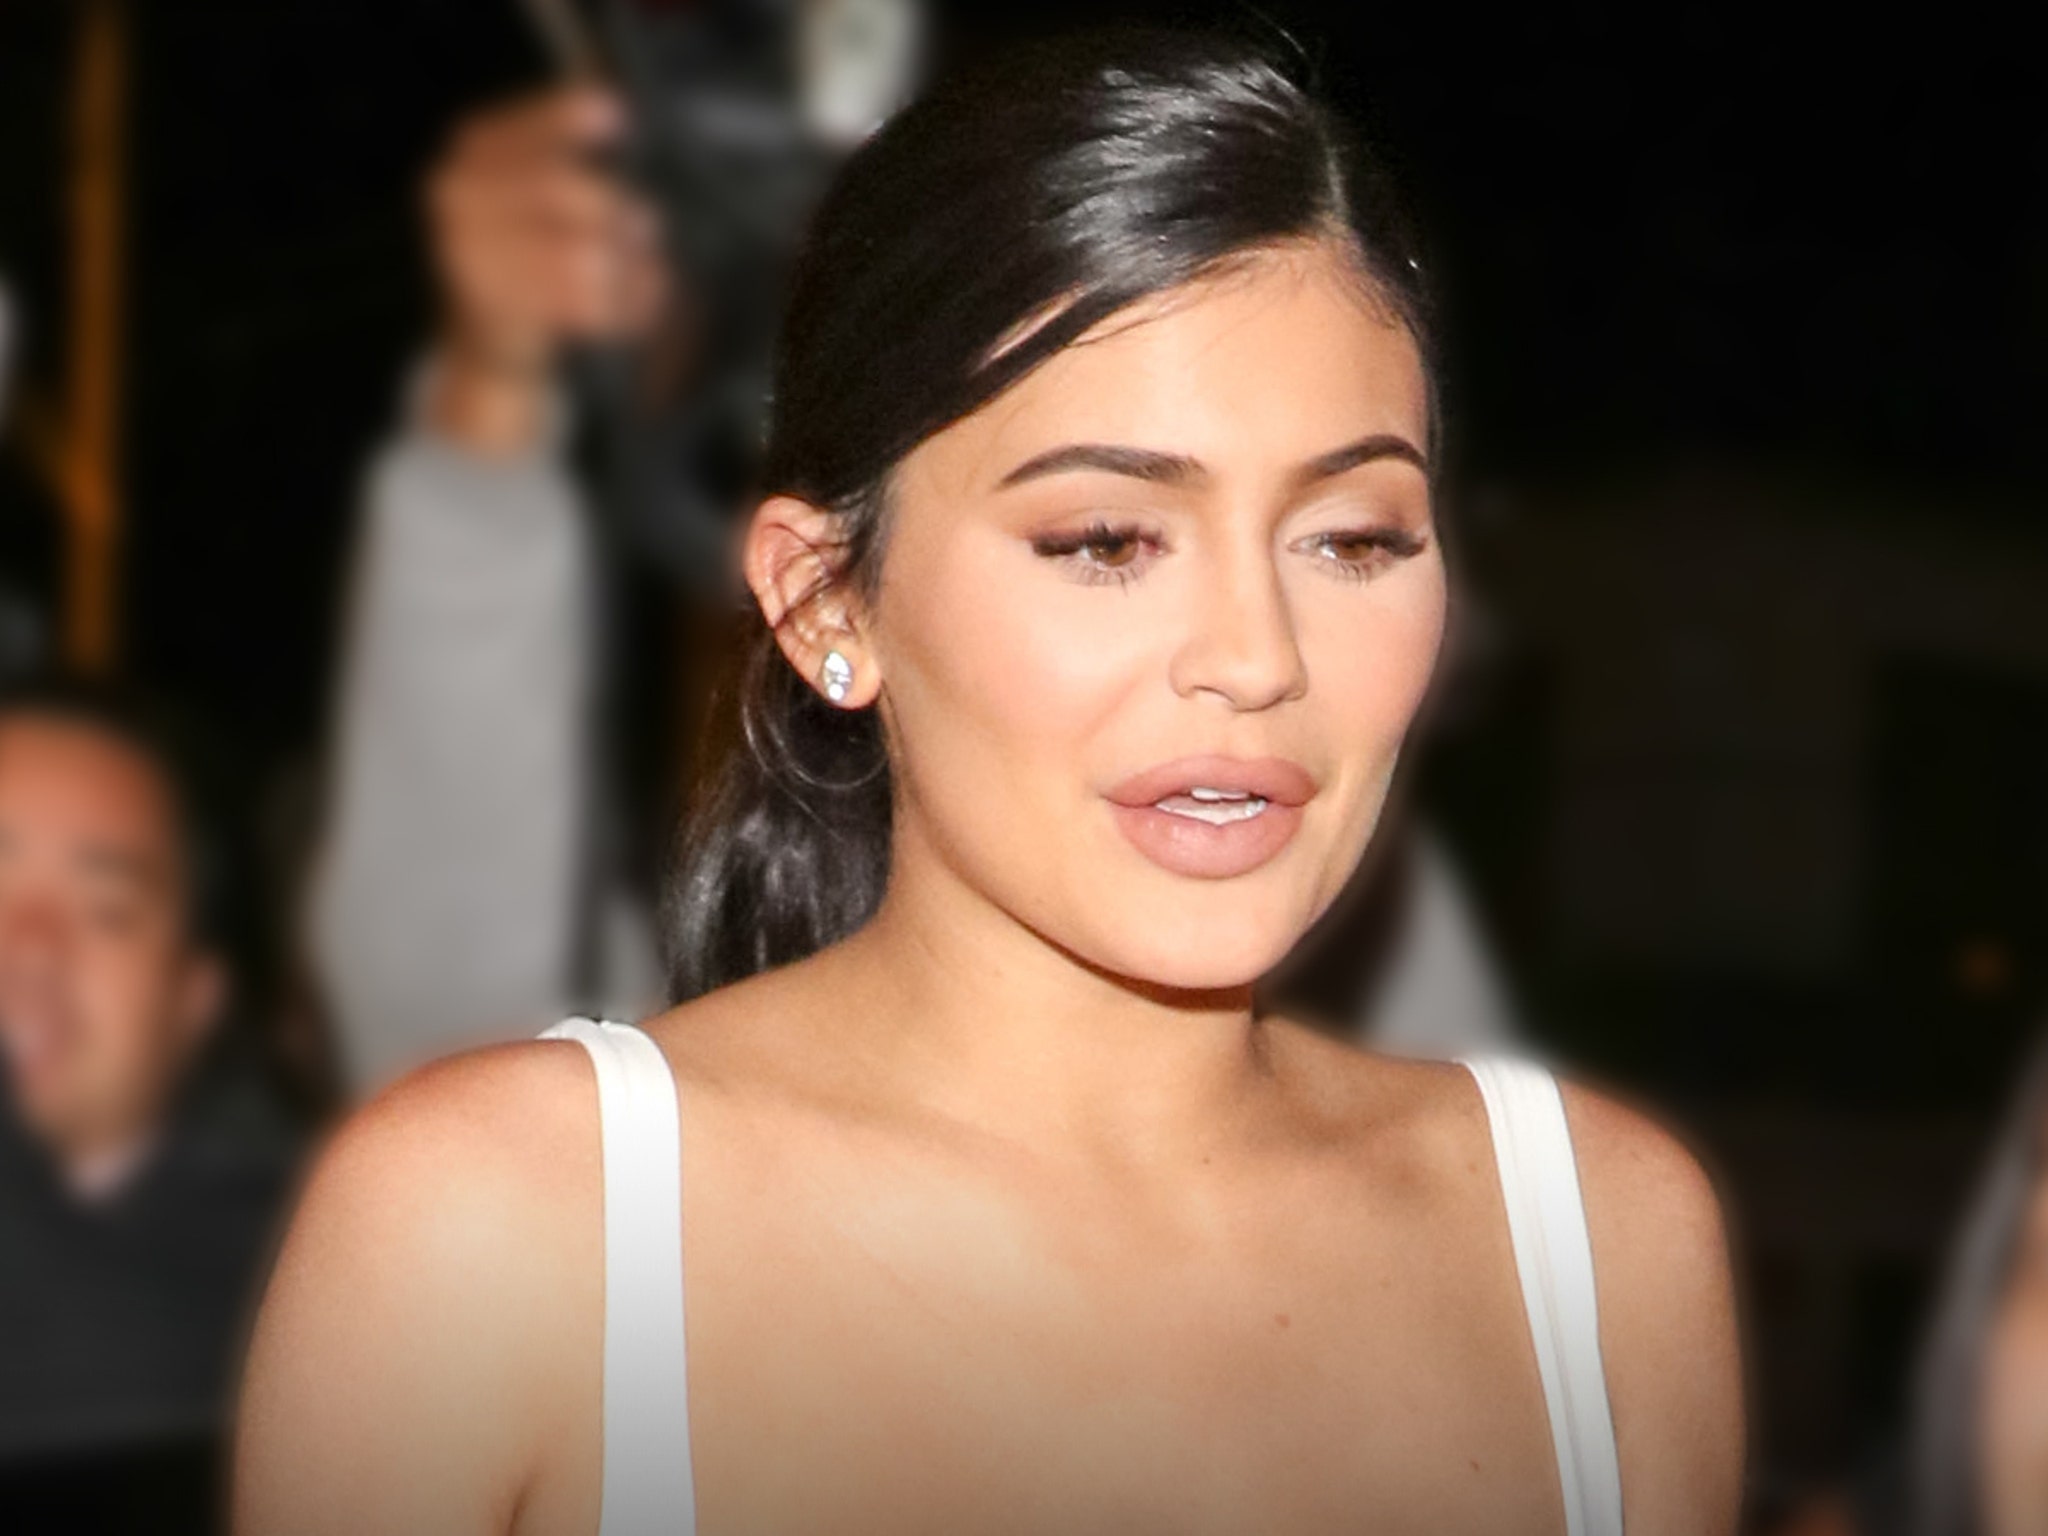 Man Arrested at Kylie Jenner's Home While Demanding to Profess His Love:  Photo 4569286, Kylie Jenner Photos